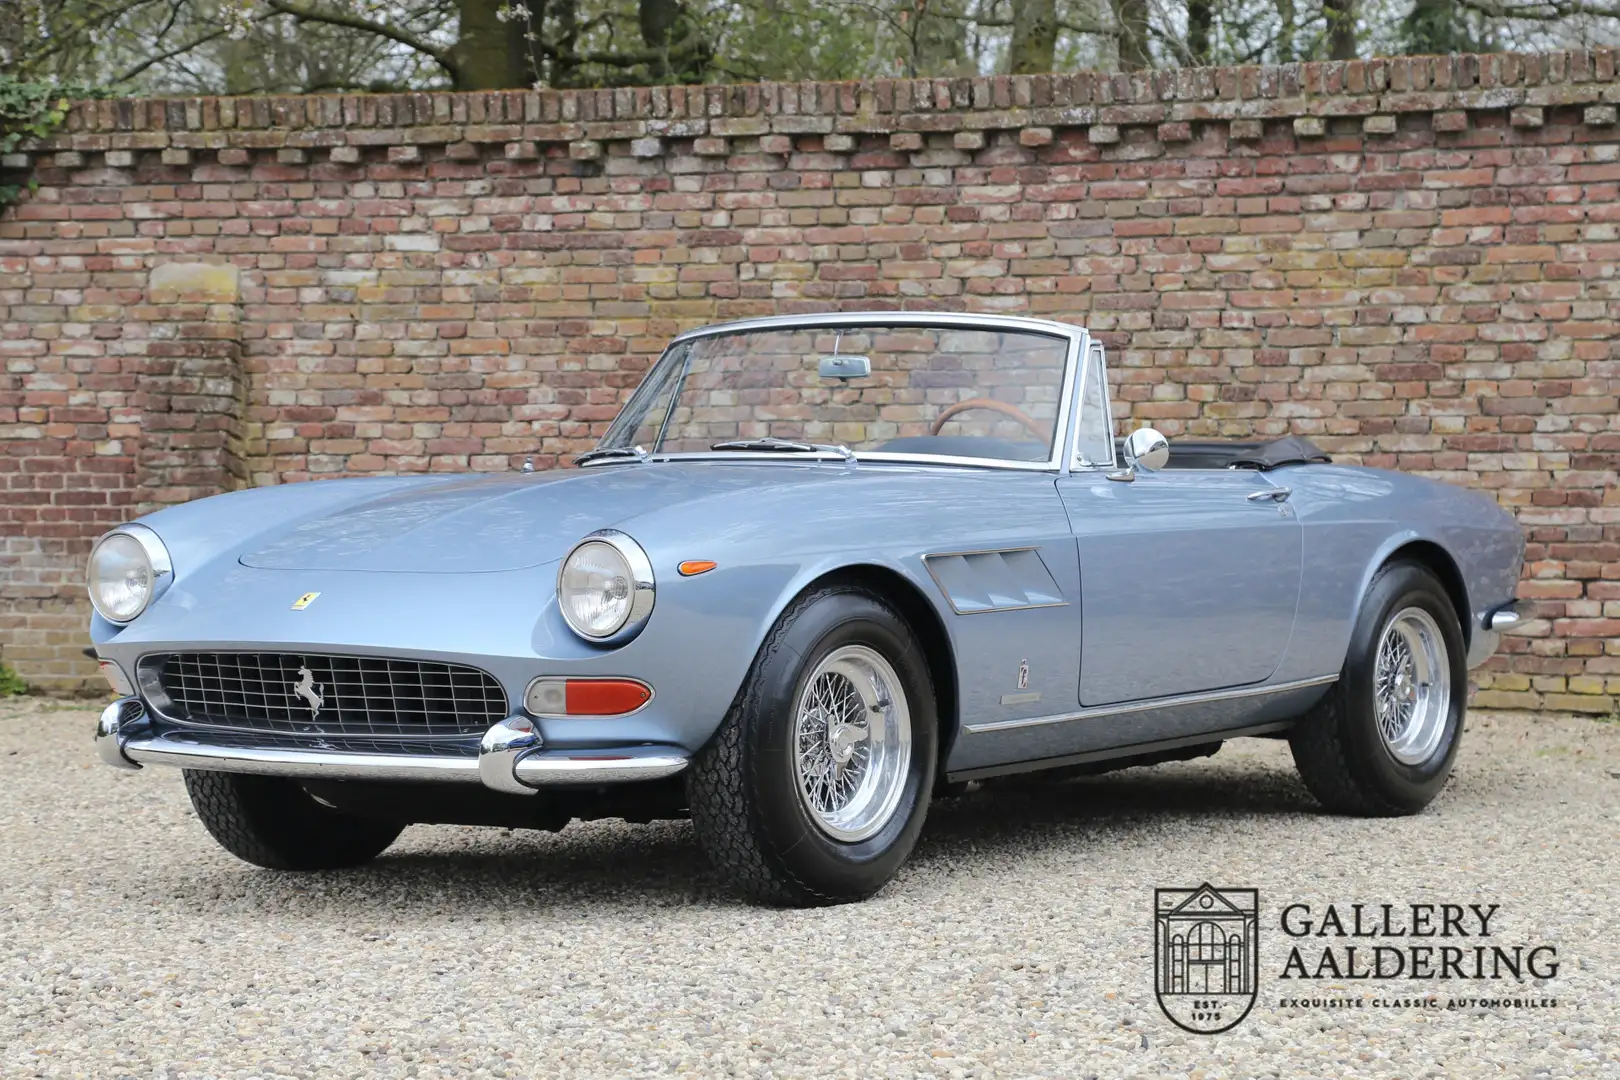 Ferrari 275 GTS 34000 Miles! Equipped with factory hard top, F plava - 1